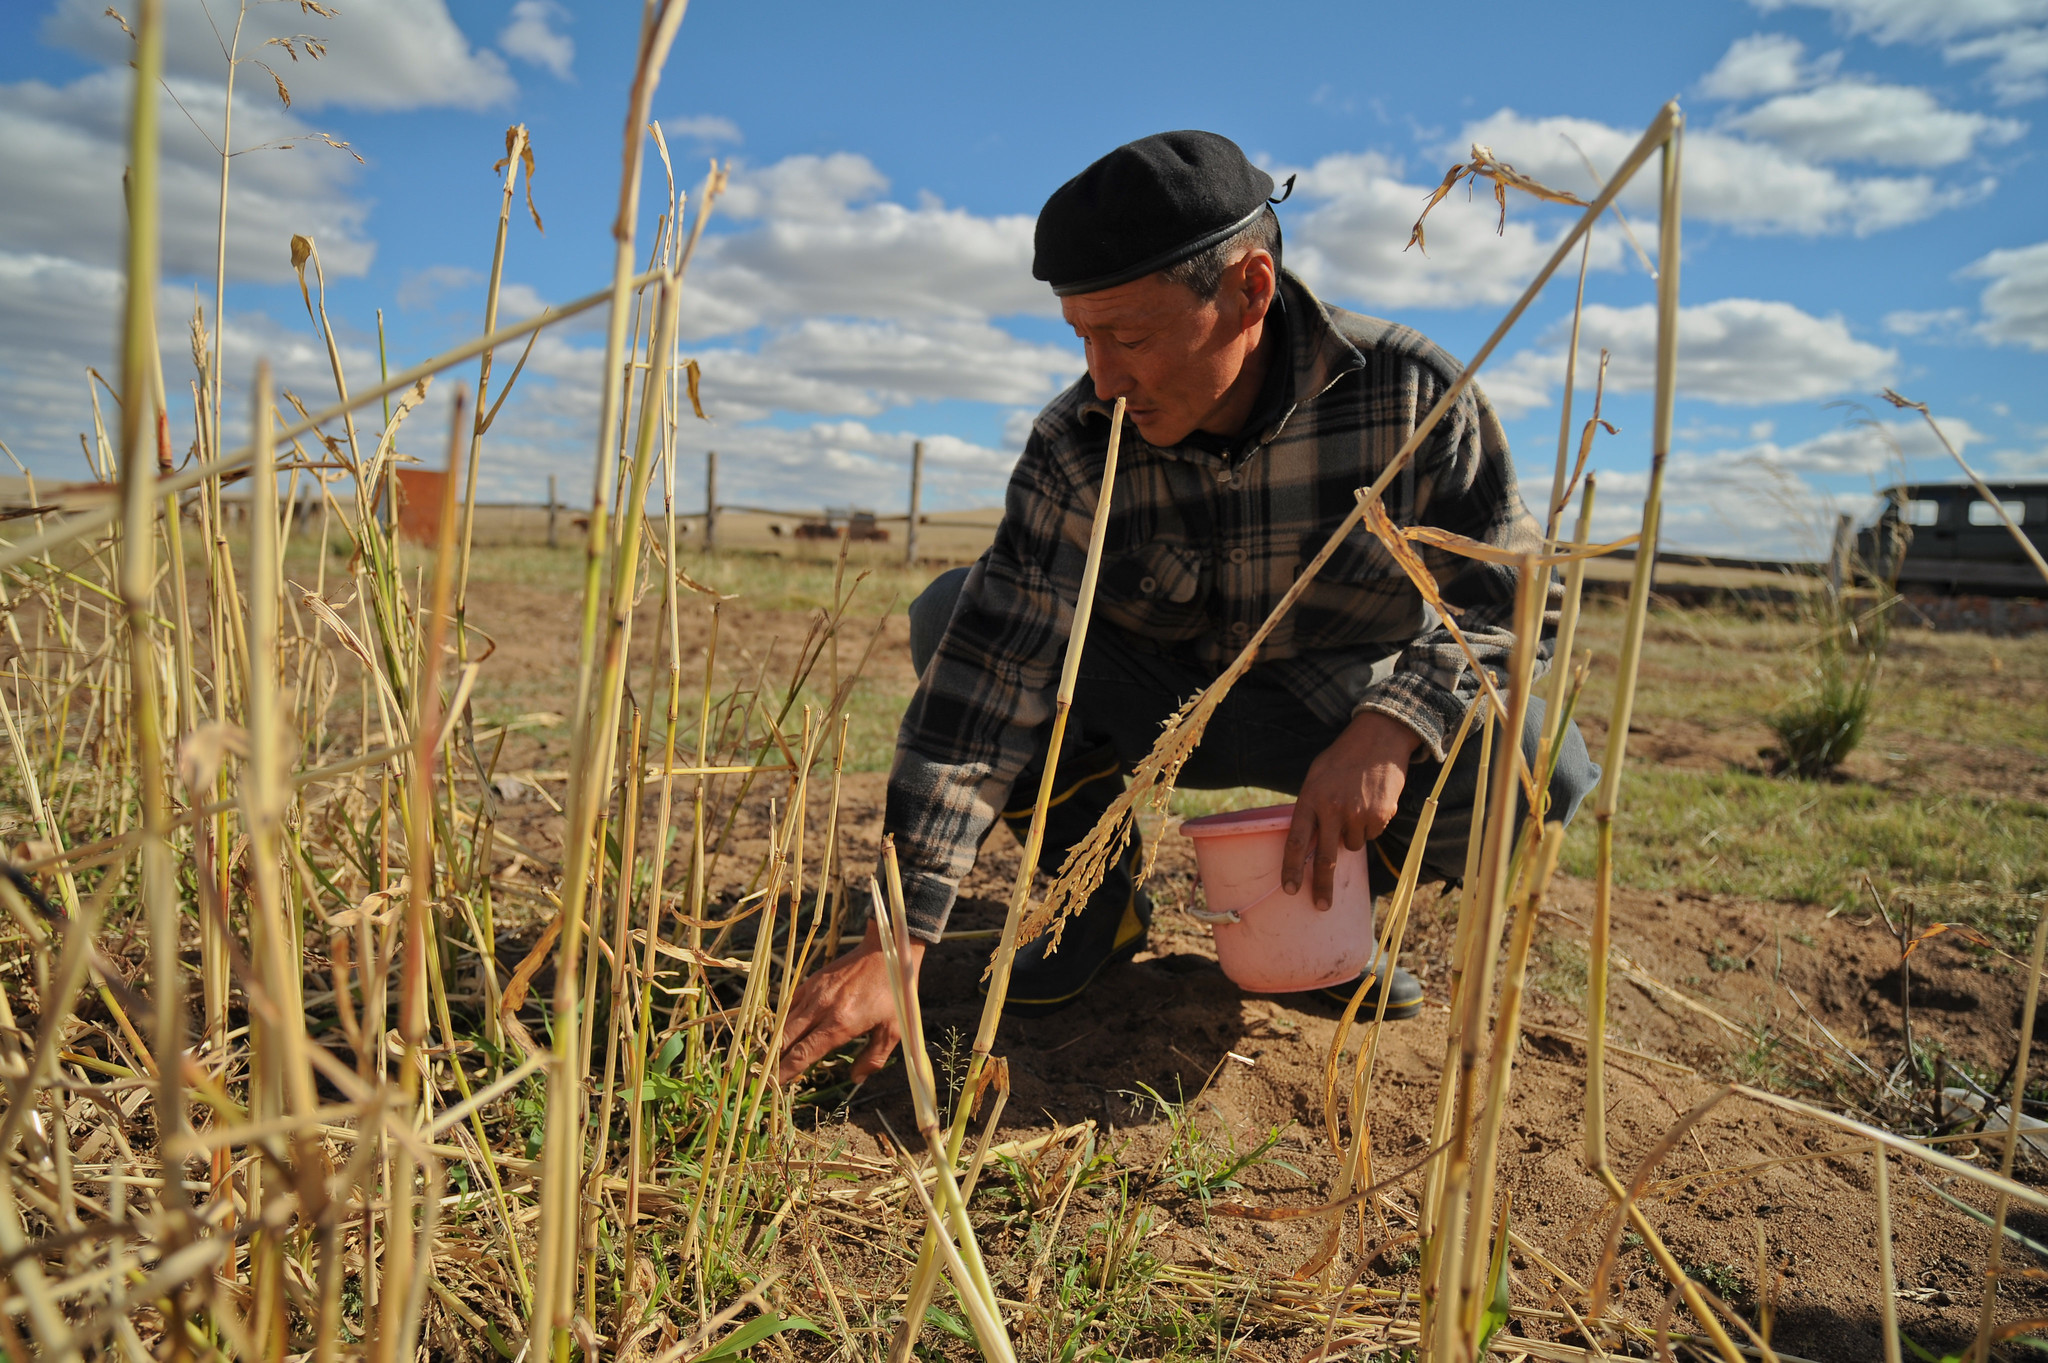 A man squatting in front of a field of failed crops on a hot day